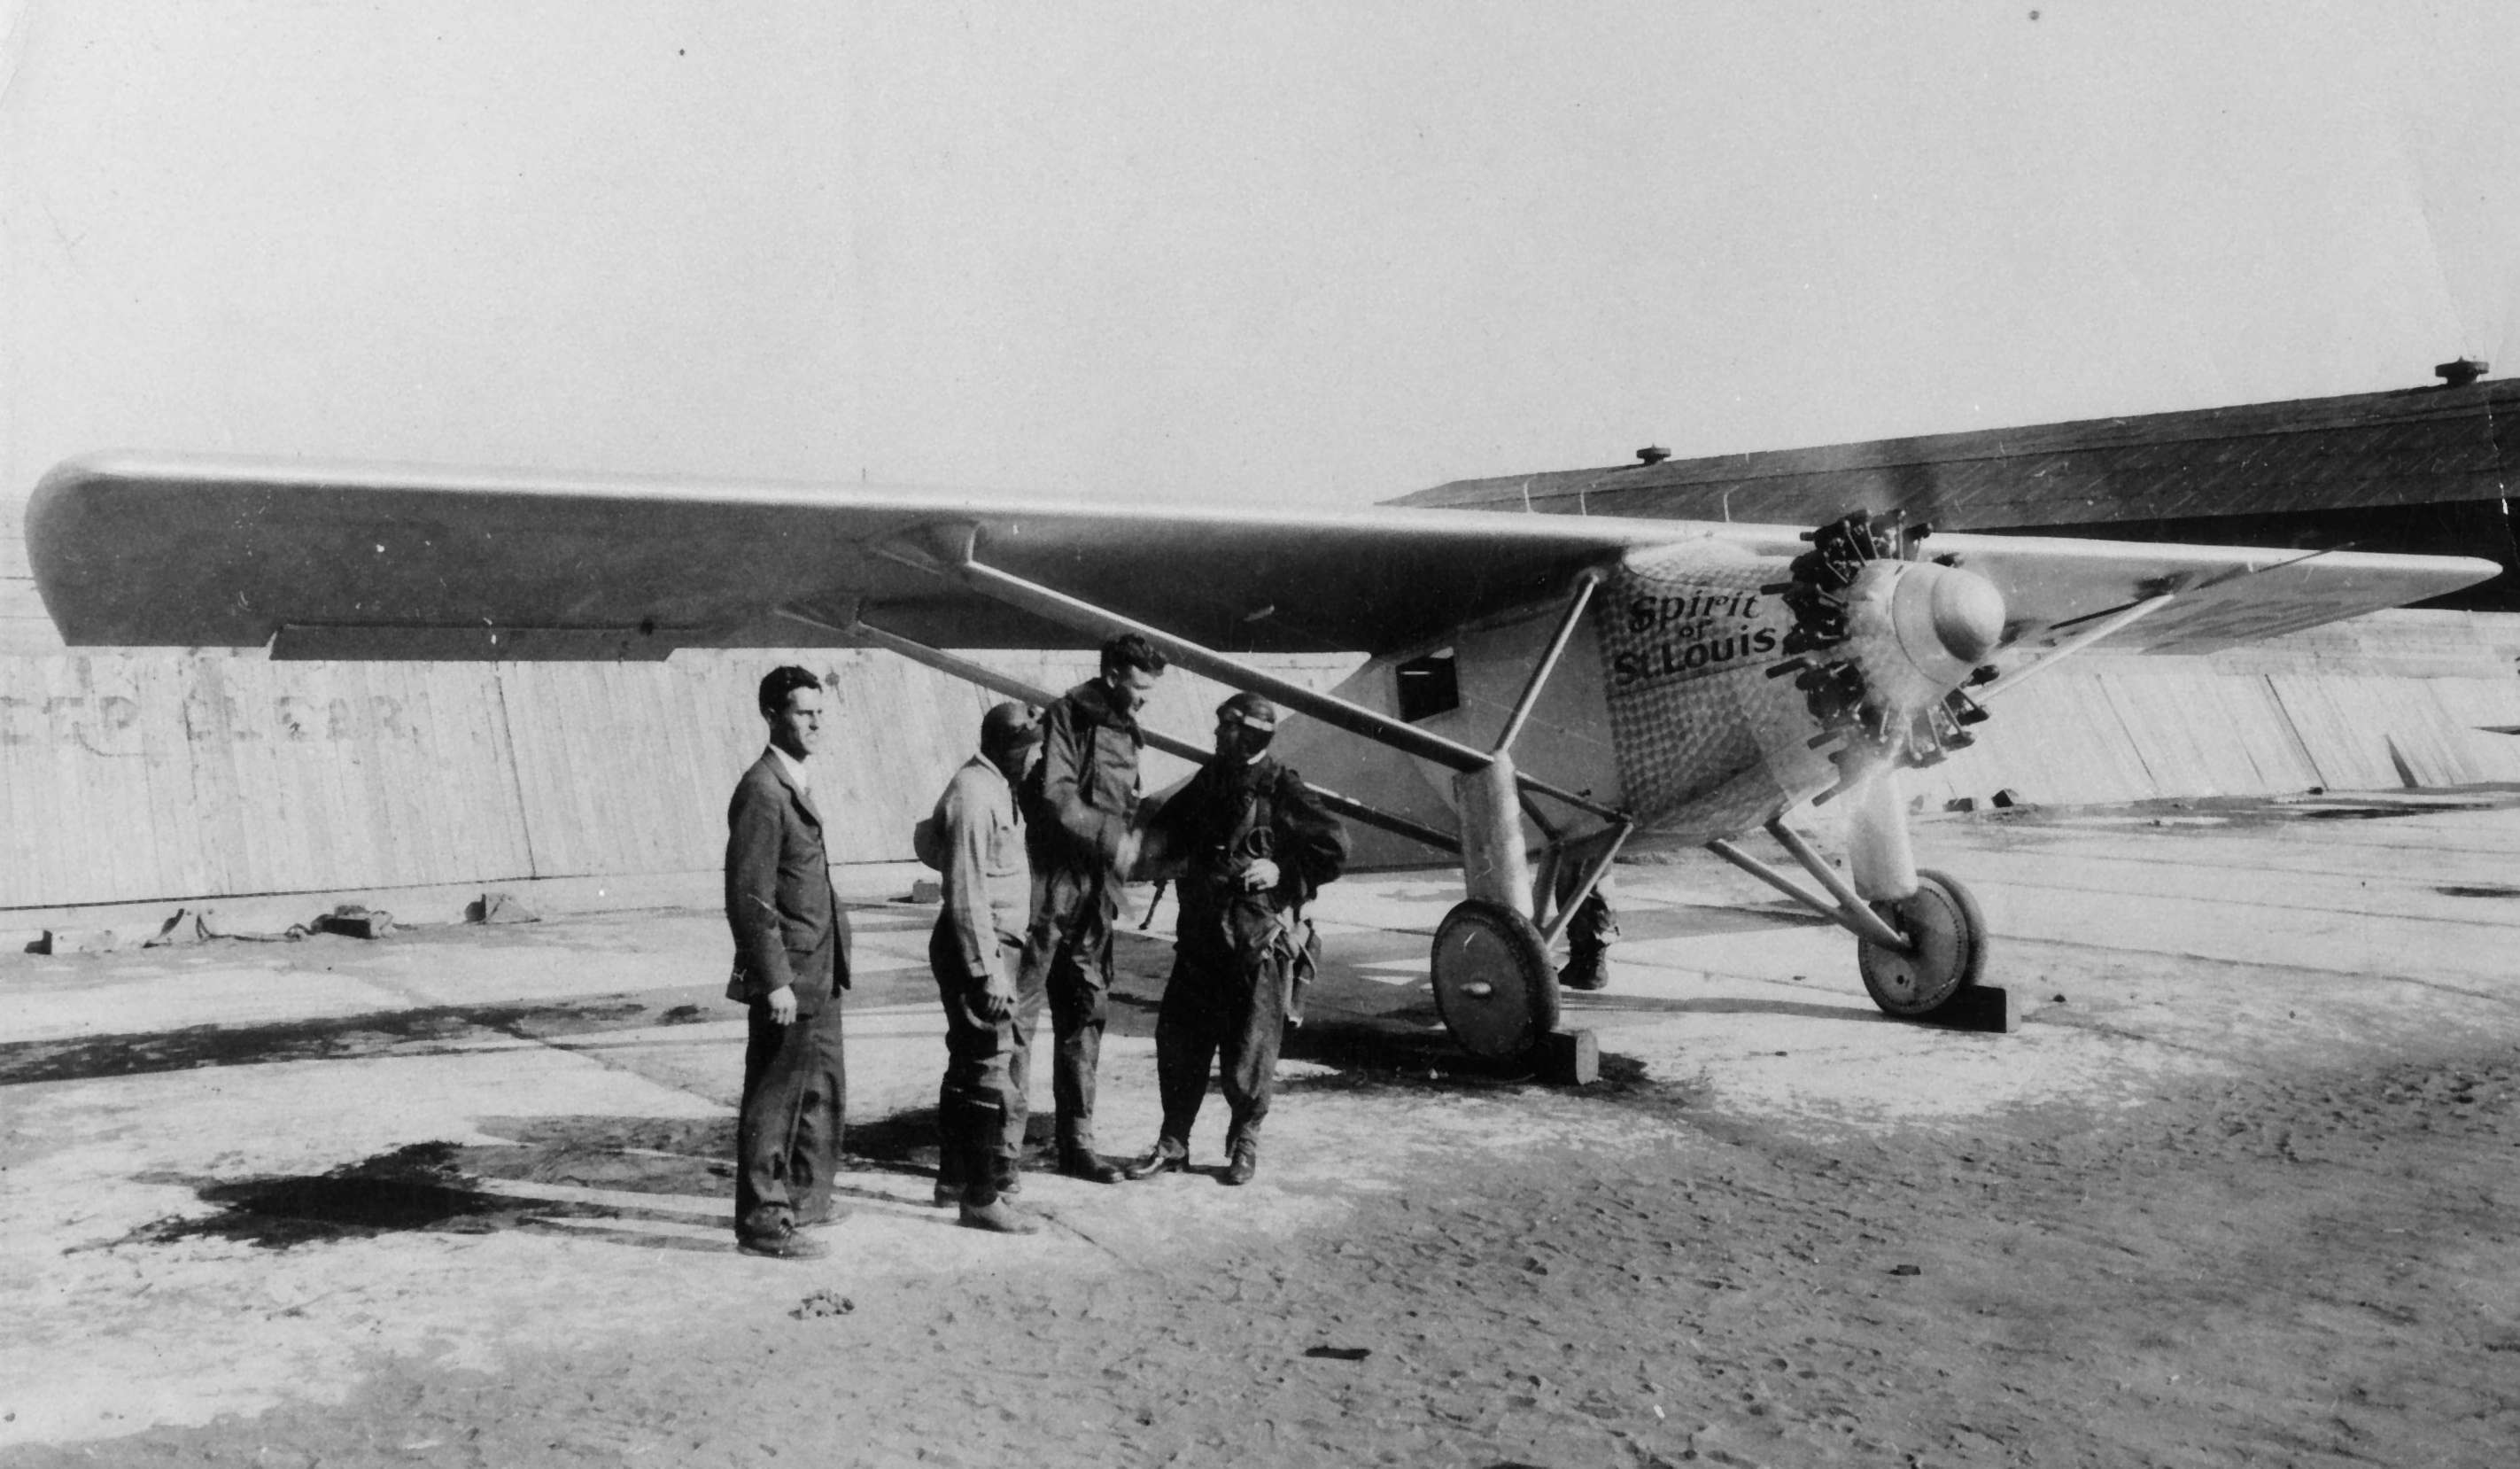 Charles-A.-Lindbergh-prepare-to-leave-for-trip-East-at-Rockwell-Field-San-Diego-10-May-1927.jpg